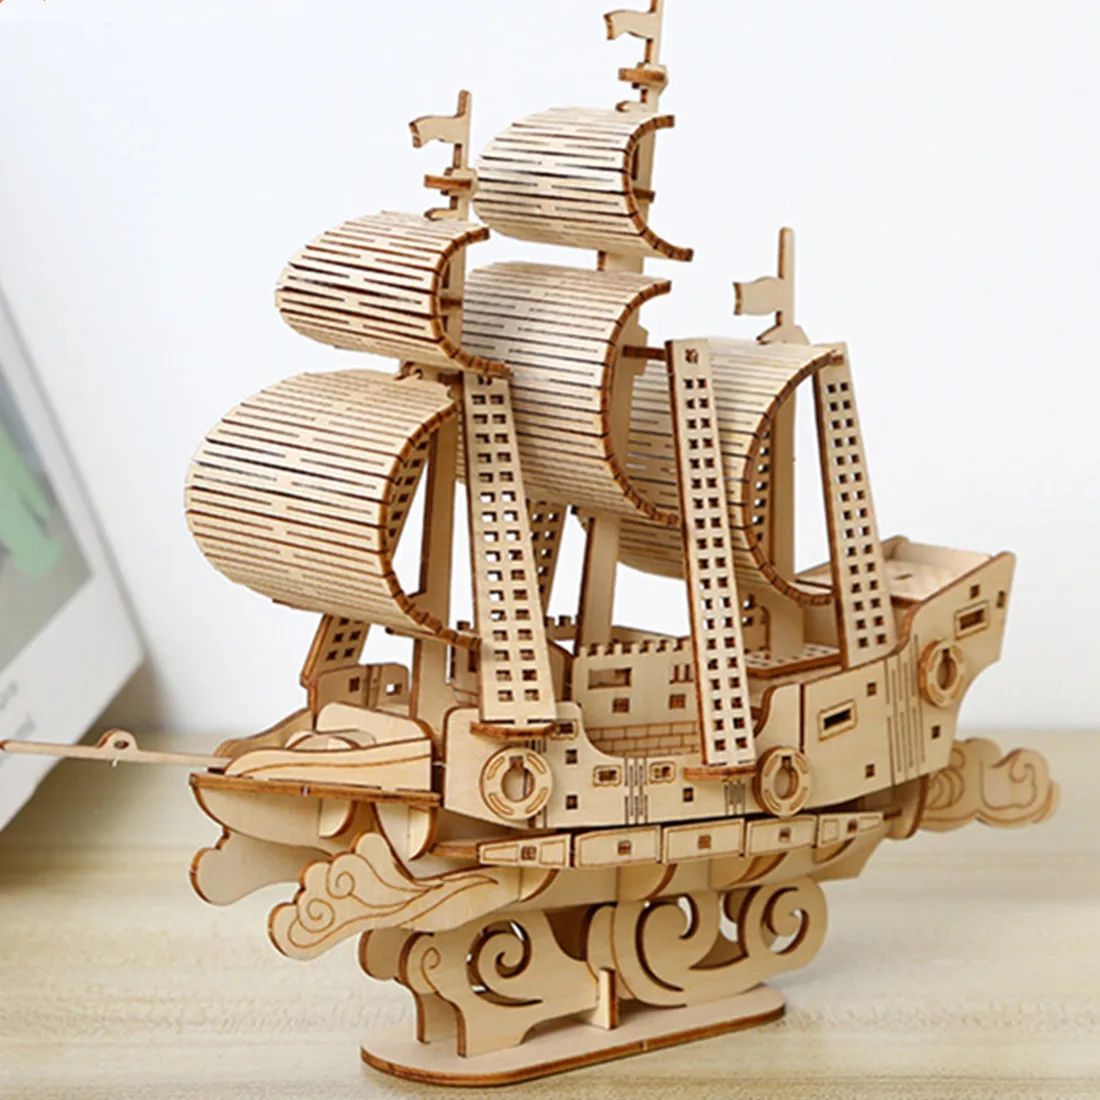 3D Puzzles Wooden Ocean Sailing Model Handmade Boat Building BlockS Kits DIY Assembly Ship Toy for Kids Adults GiftS building blocks assembly car racing model toy series